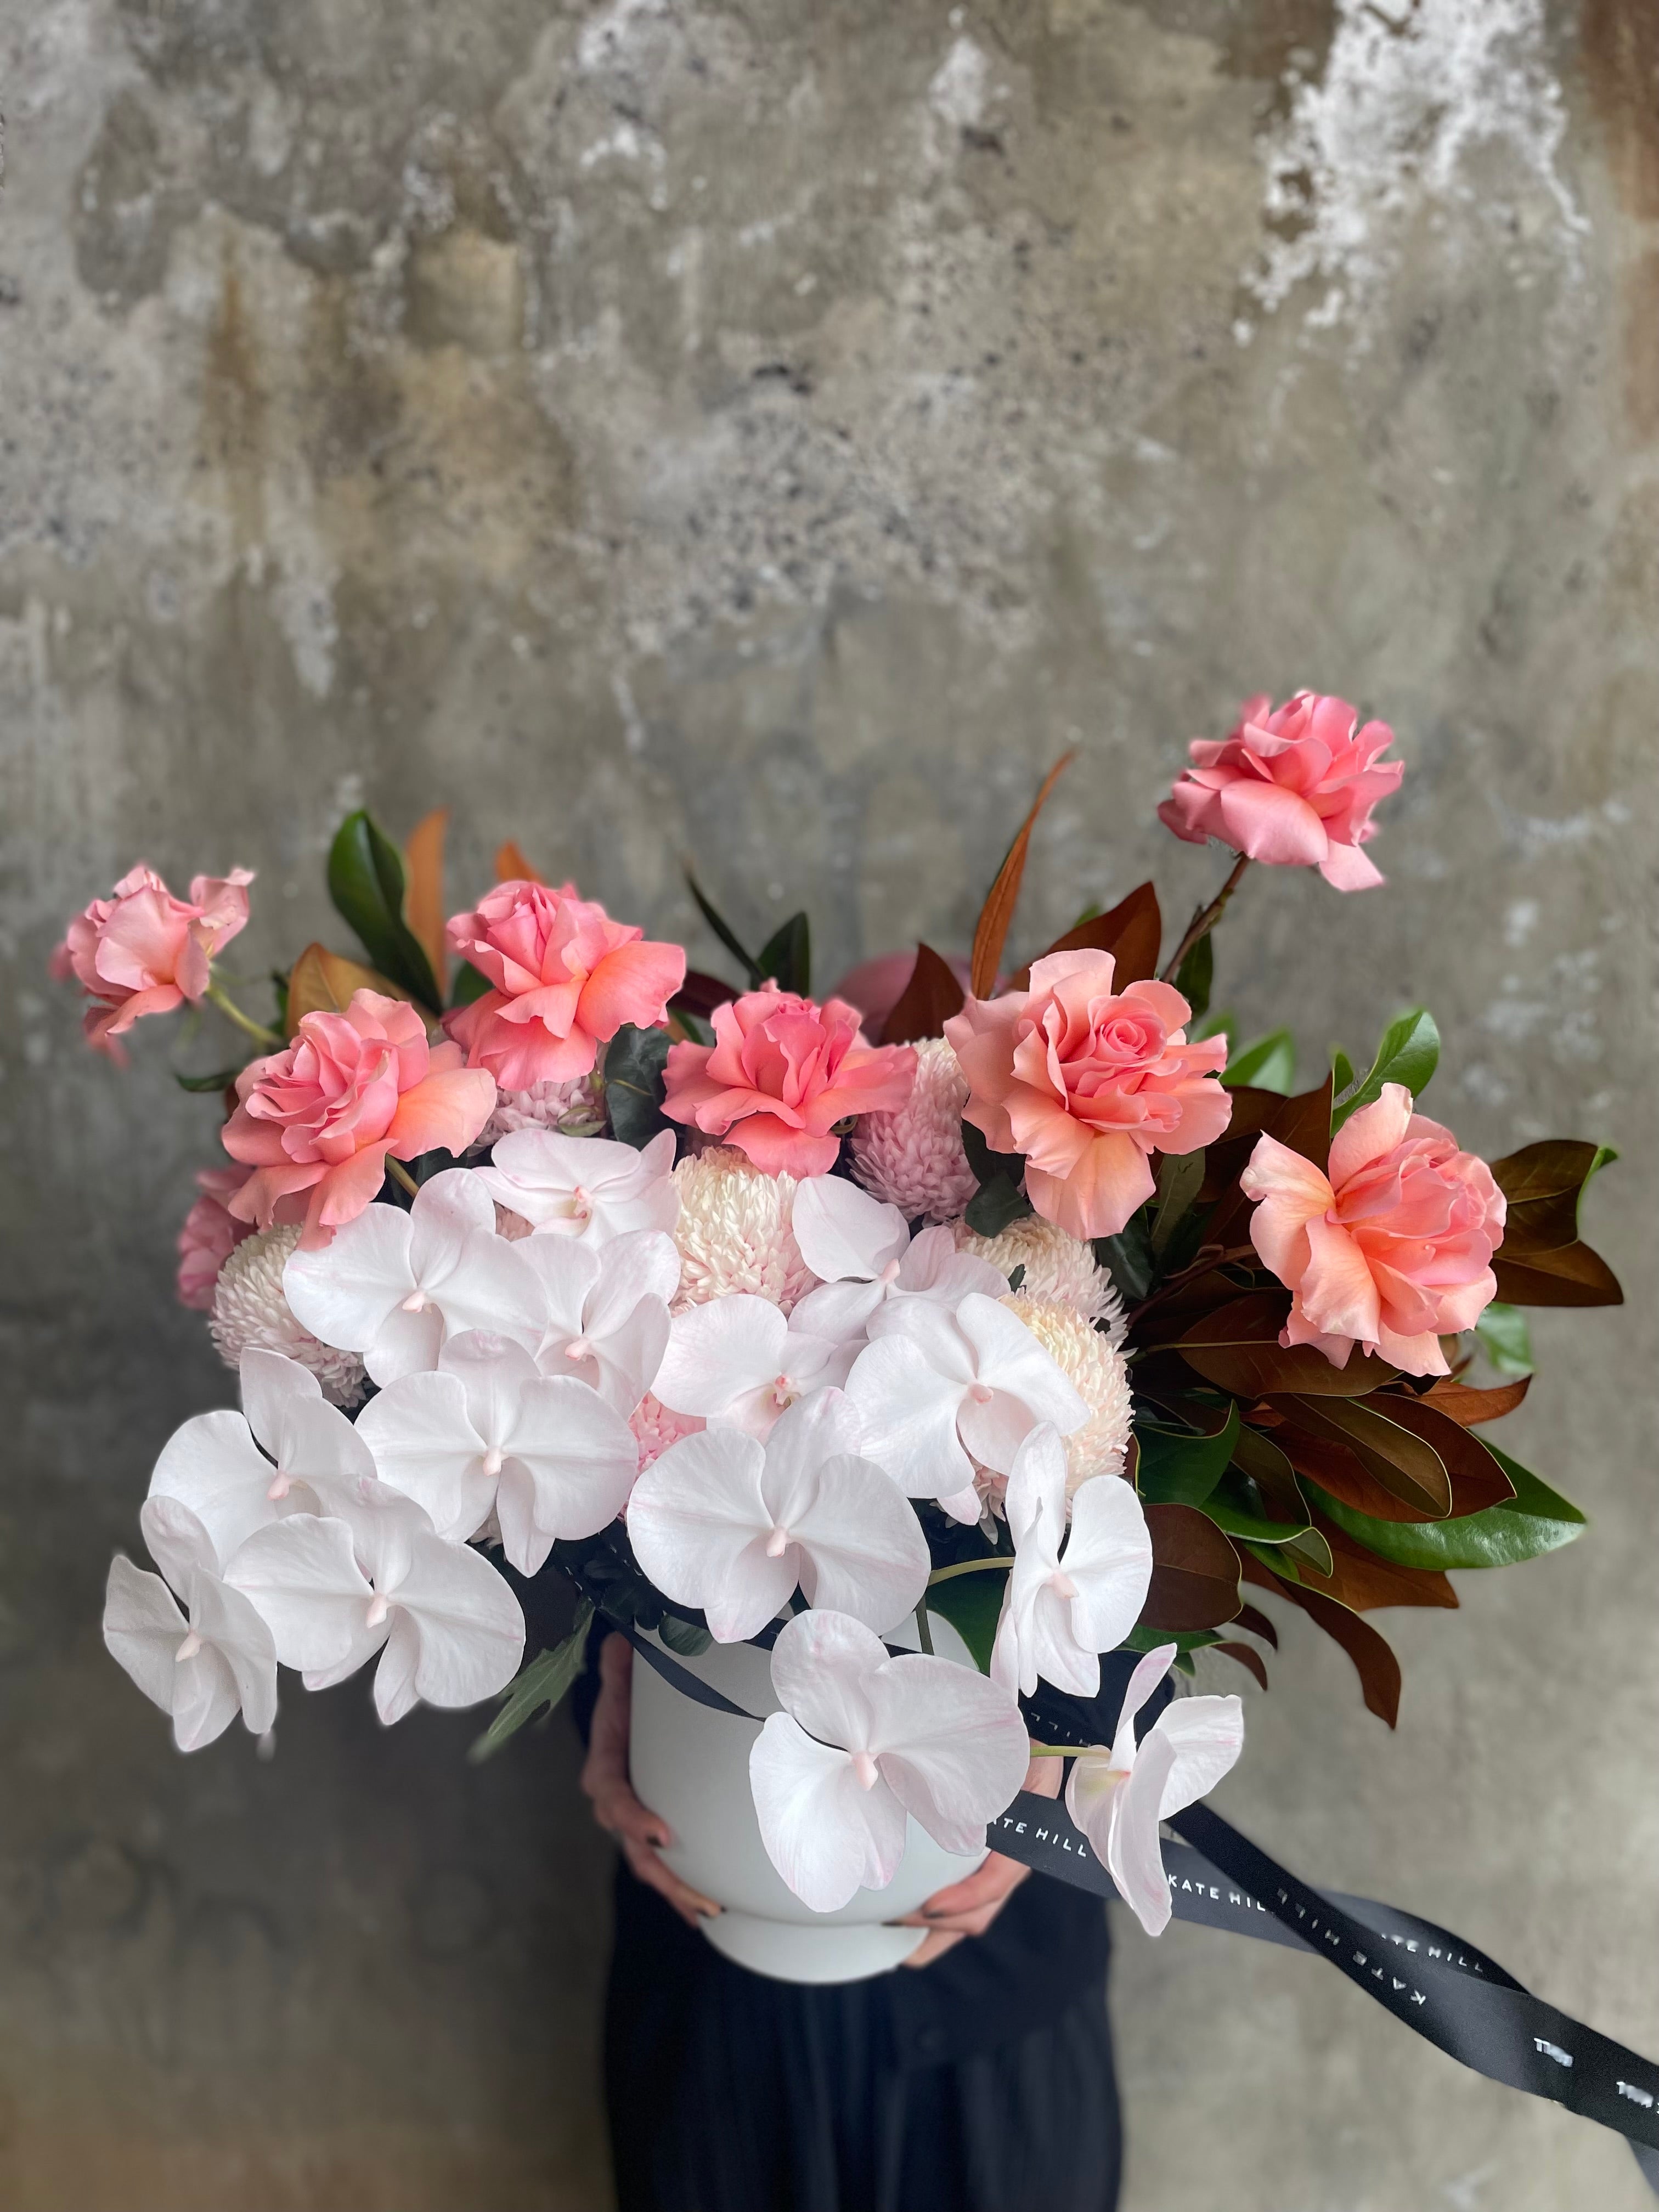 Close up image of large and luxe white ceramic vase displaying luxe blush pink flowers and magnolia foliage. Design sitting on a black bentwood chair with concrete wall behind.